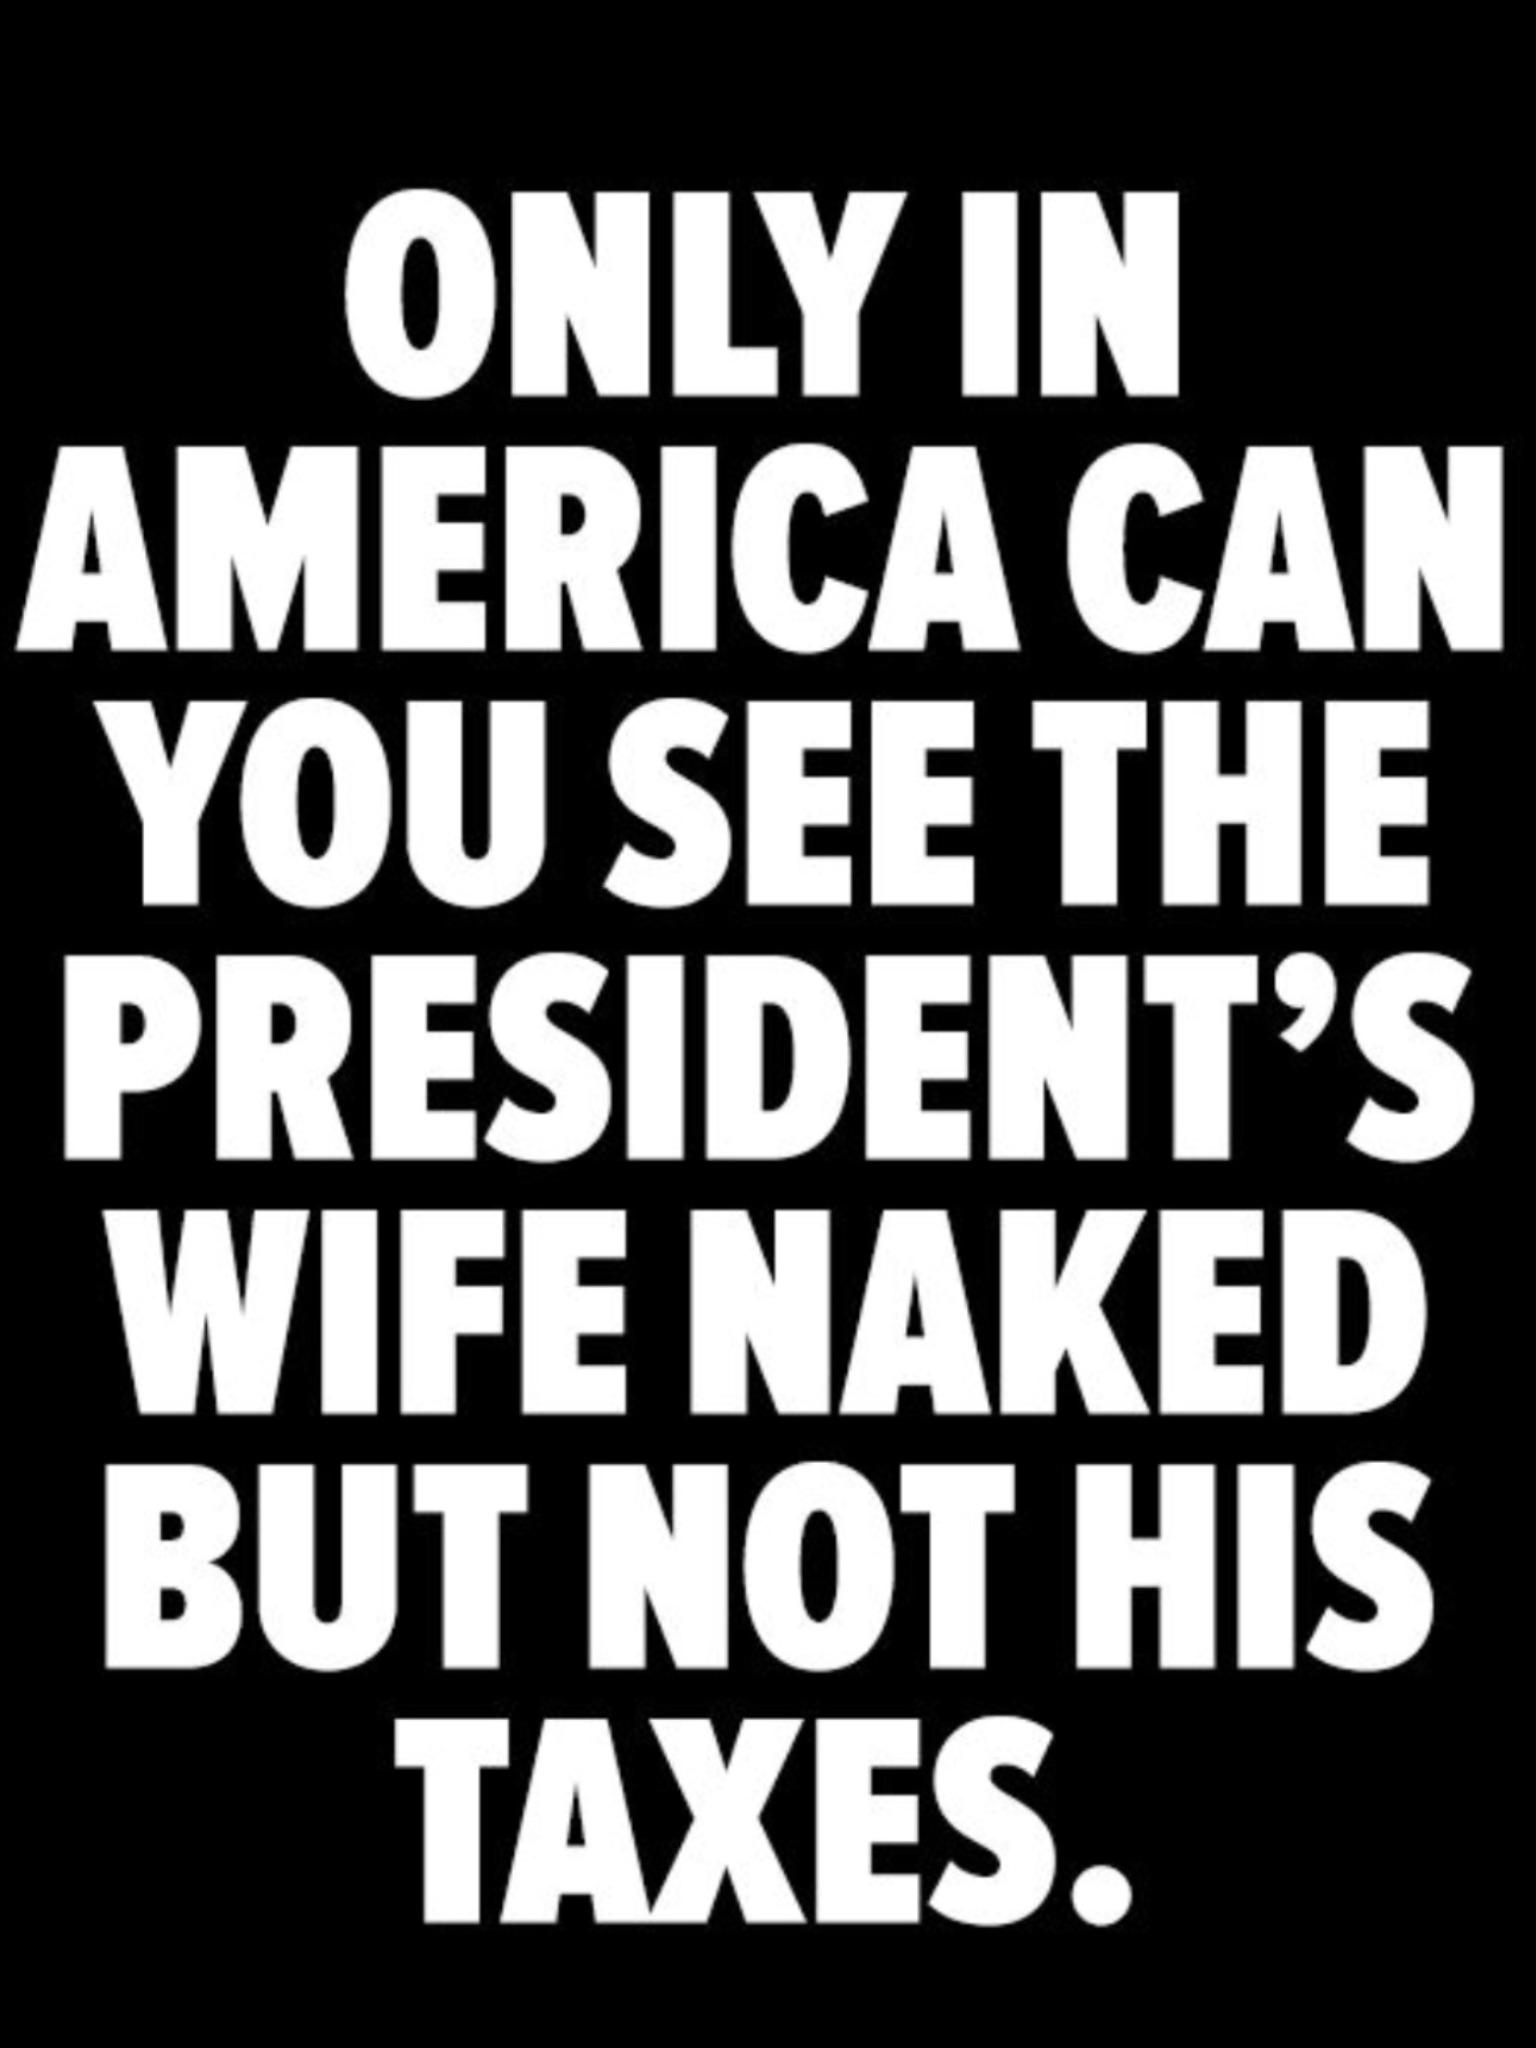 political meme alfred e newman for president - Only In America Can You See The President'S Wife Naked But Not His Taxes.